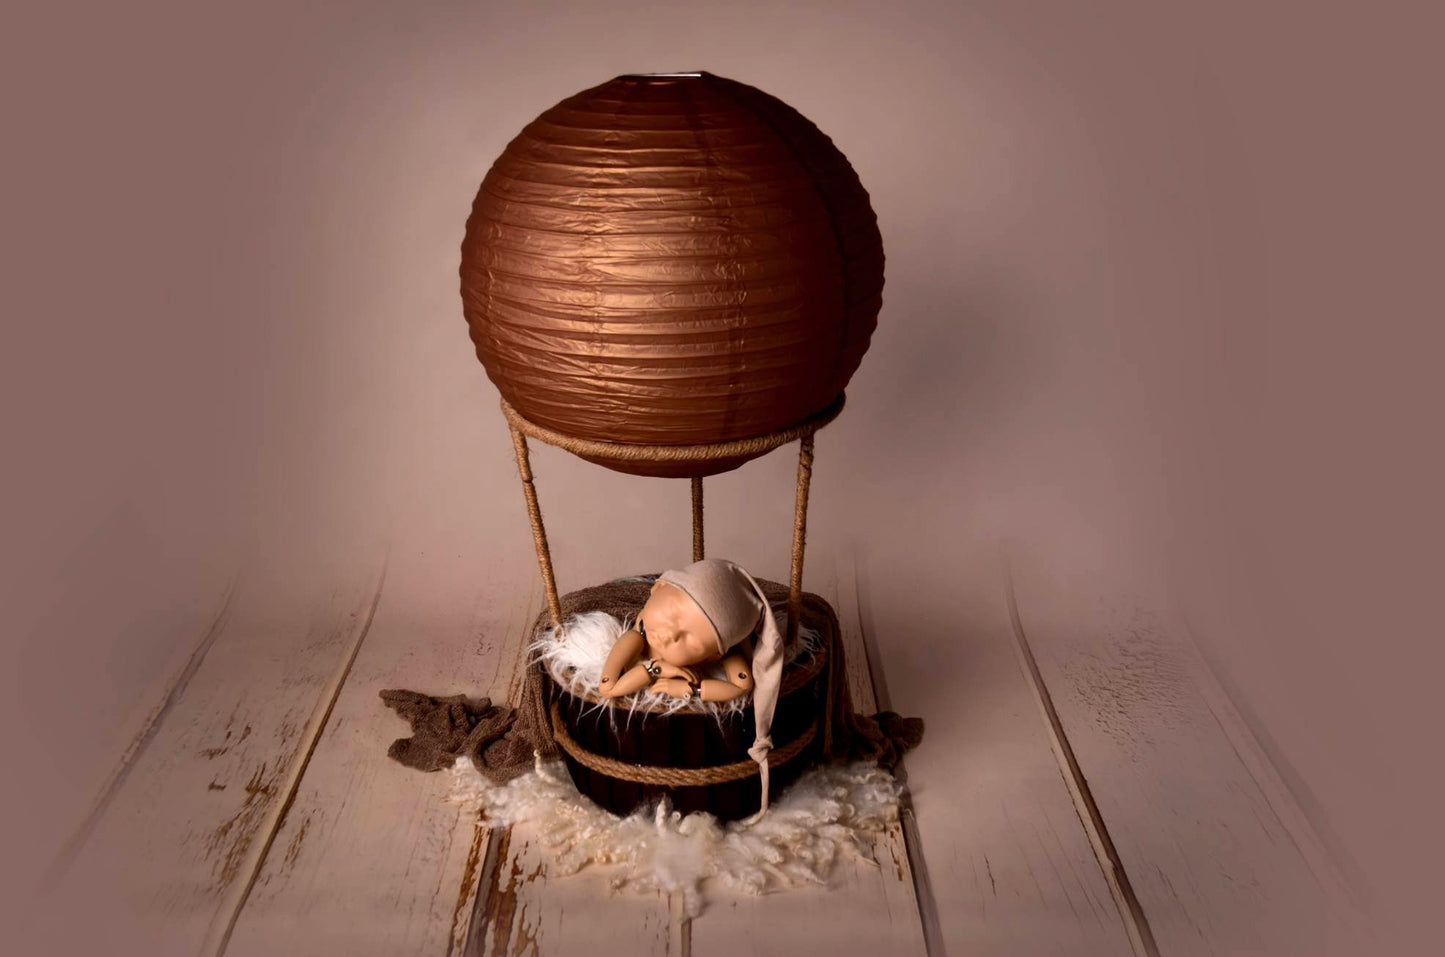 Hot air balloon-inspired newborn photography prop including balloon top in 6 different colors, natural jute ropes, and a deep burgundy wooden basket. Perfect for unique and enchanting newborn photos.